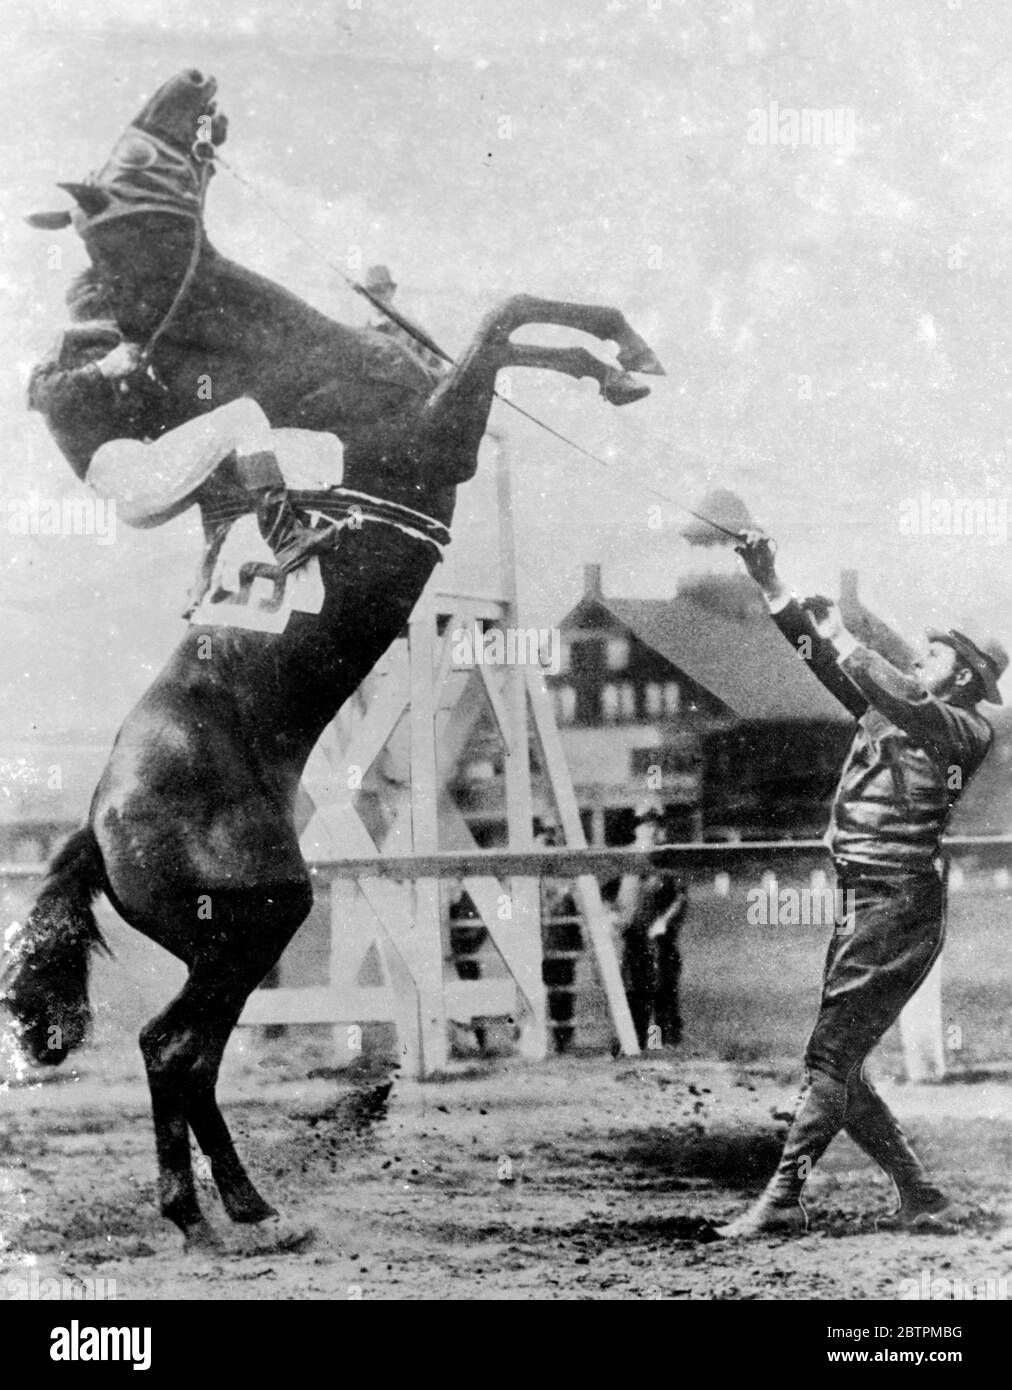 Only The Horse Laughed ! Photo Shows : En masse , a racehorse [ Seabiscuit ? ] with a taste for practical jokes , doing his best ( or worst ! ) to dispose of his rider , little Ira Hanford , at Jamaica . Hanford held on for all he was worth as a racehorse official at the other end of the helter did his best to persuade the almost perpendicular steed to return to earth . 9 May 1936 Stock Photo